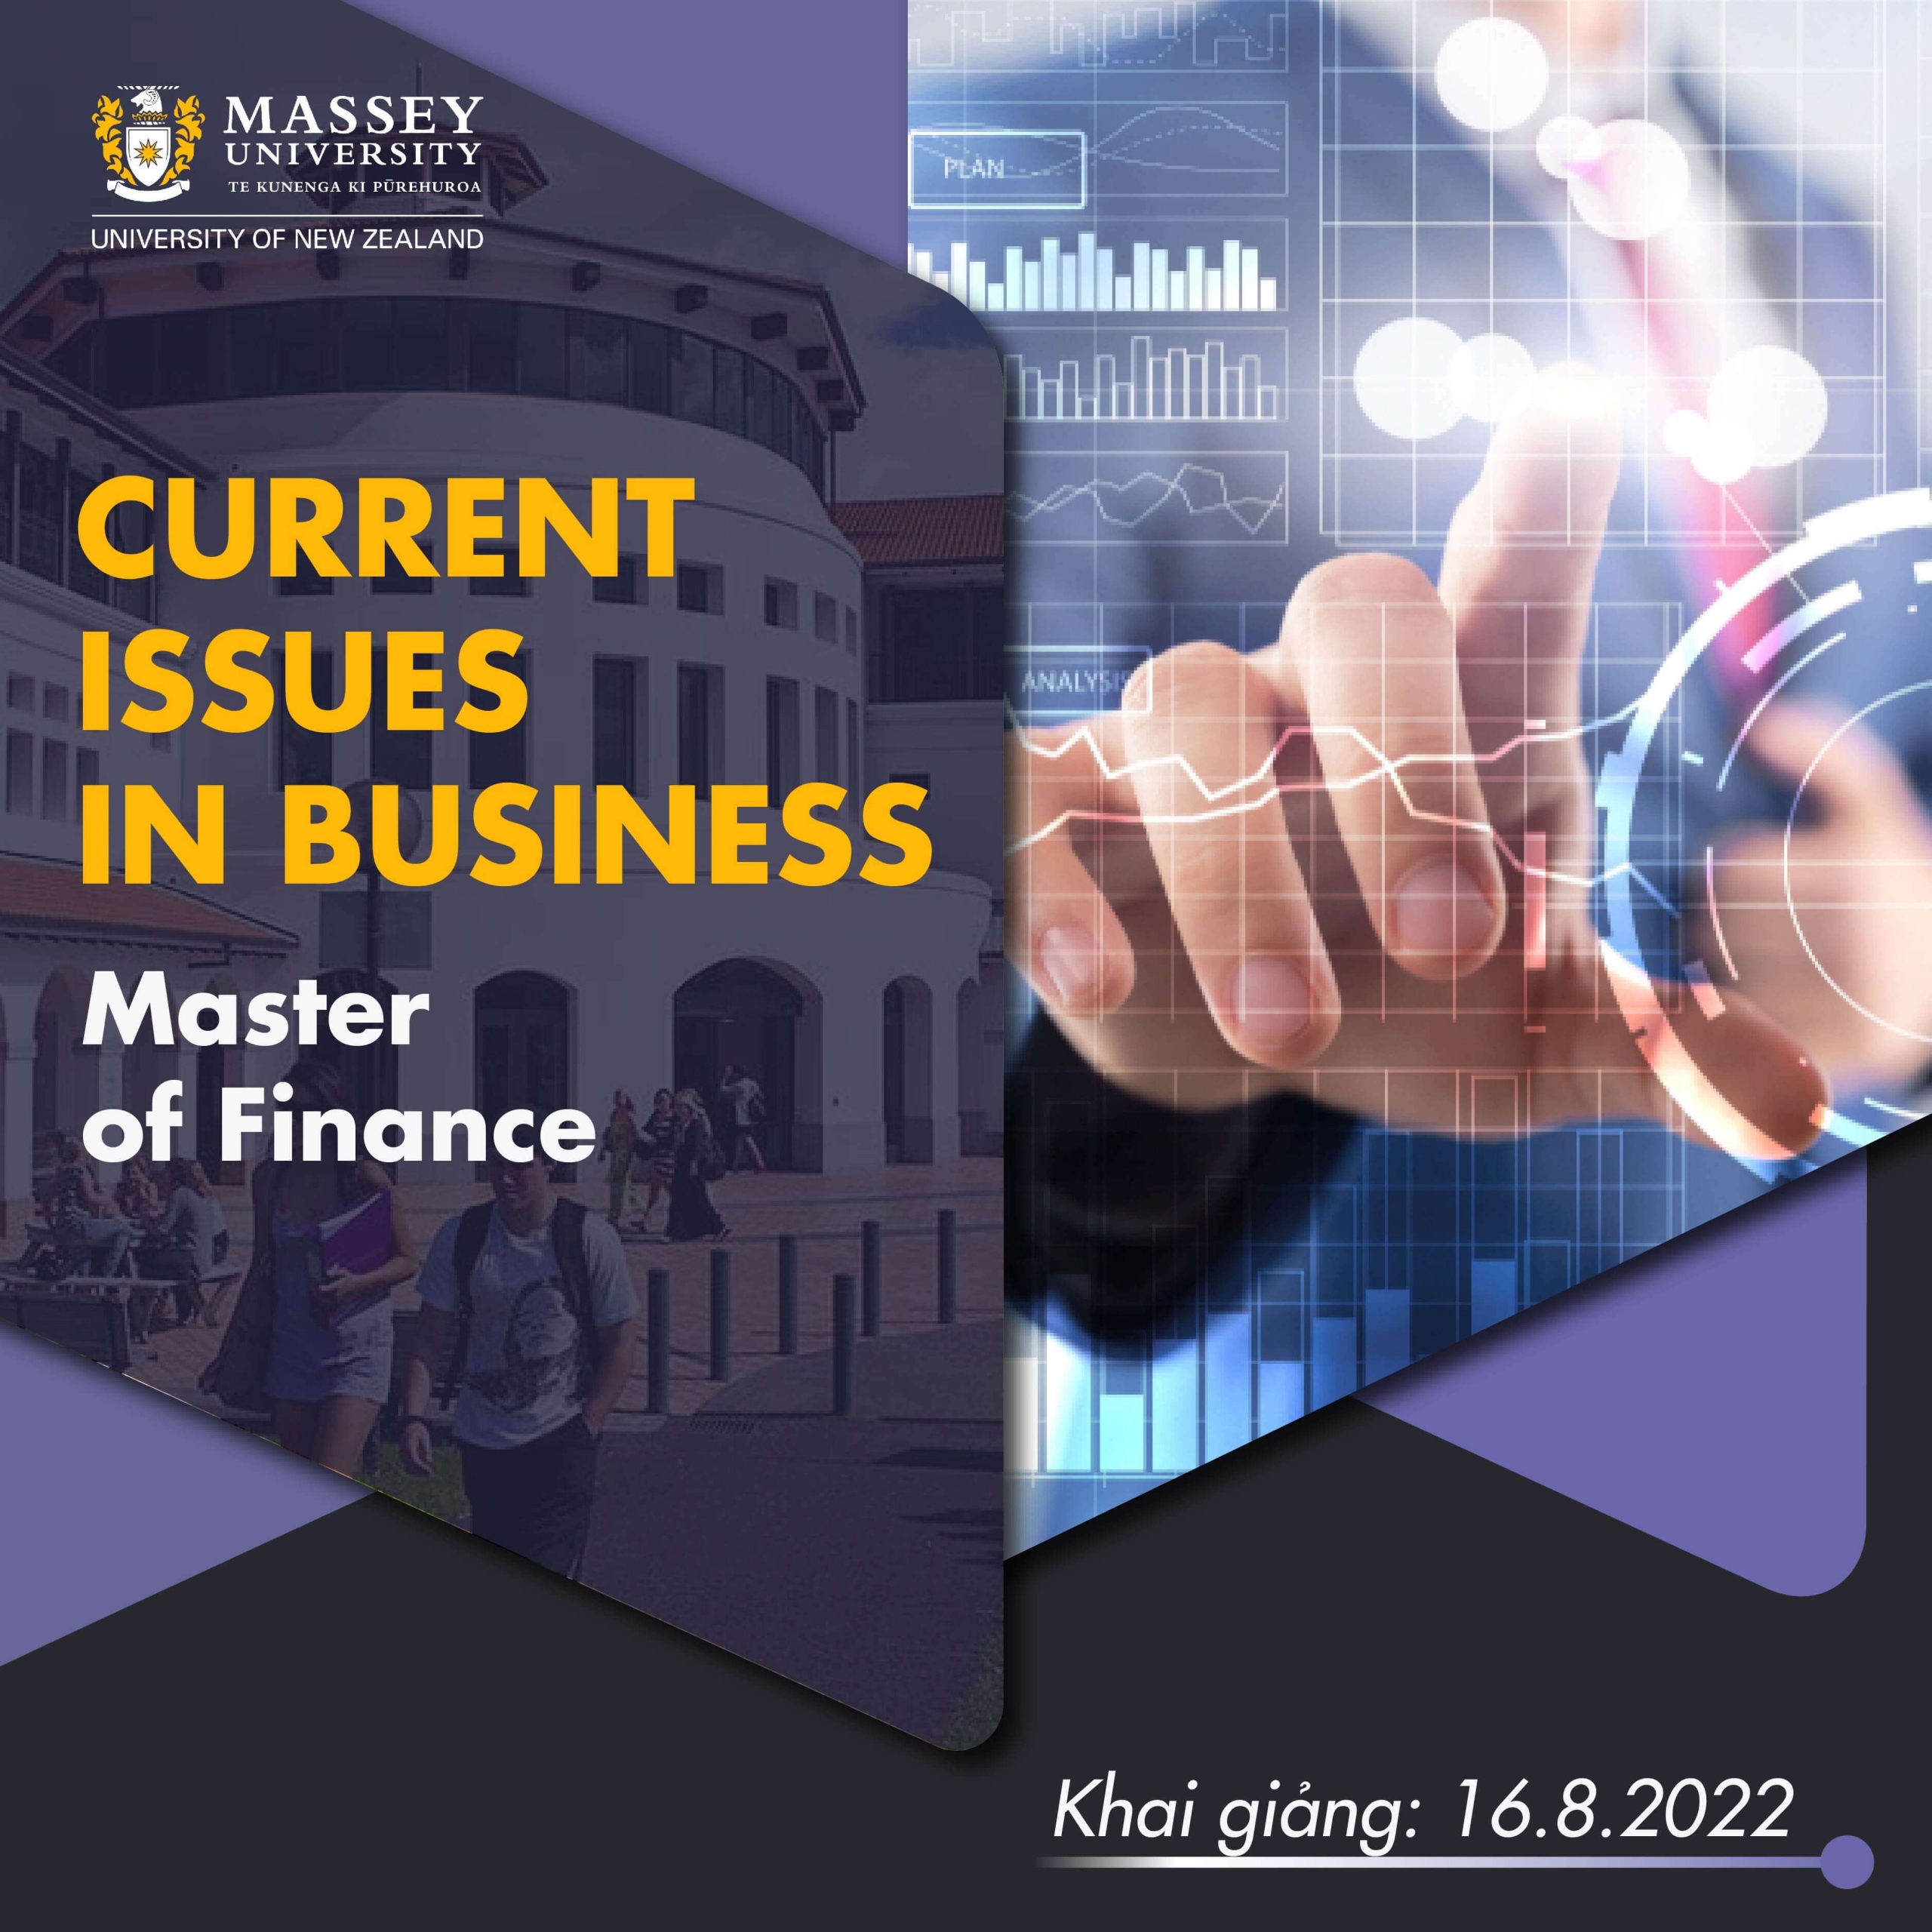 KHAI GIẢNG KHÓA CURRENT ISSUES IN BUSINESS THÁNG 8/2022